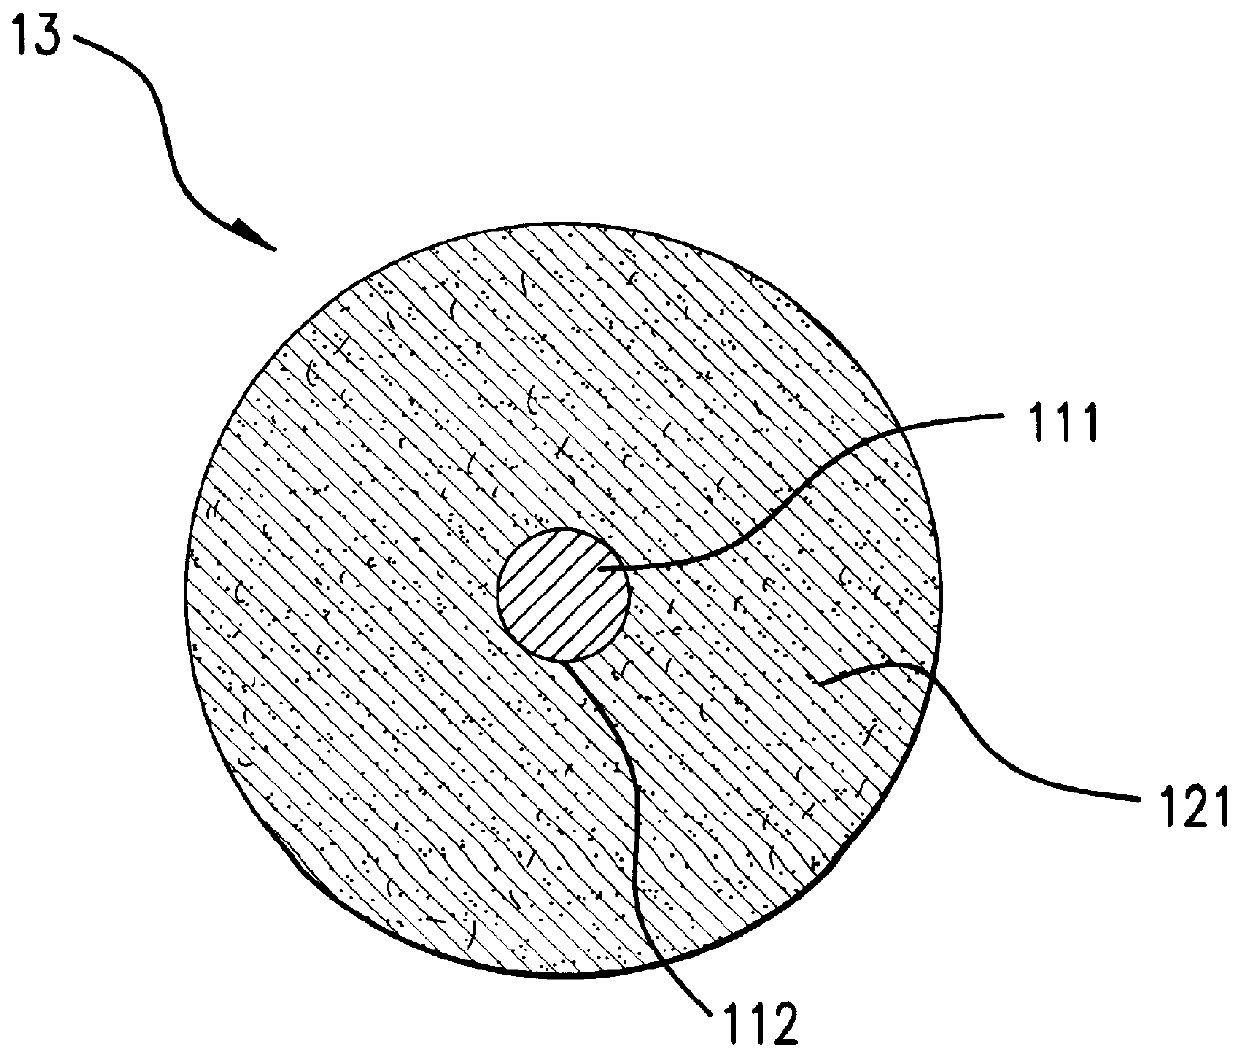 Method for producing an electrically conductive yarn, the electrically conductive yarn and use of the electrically conductive yarn